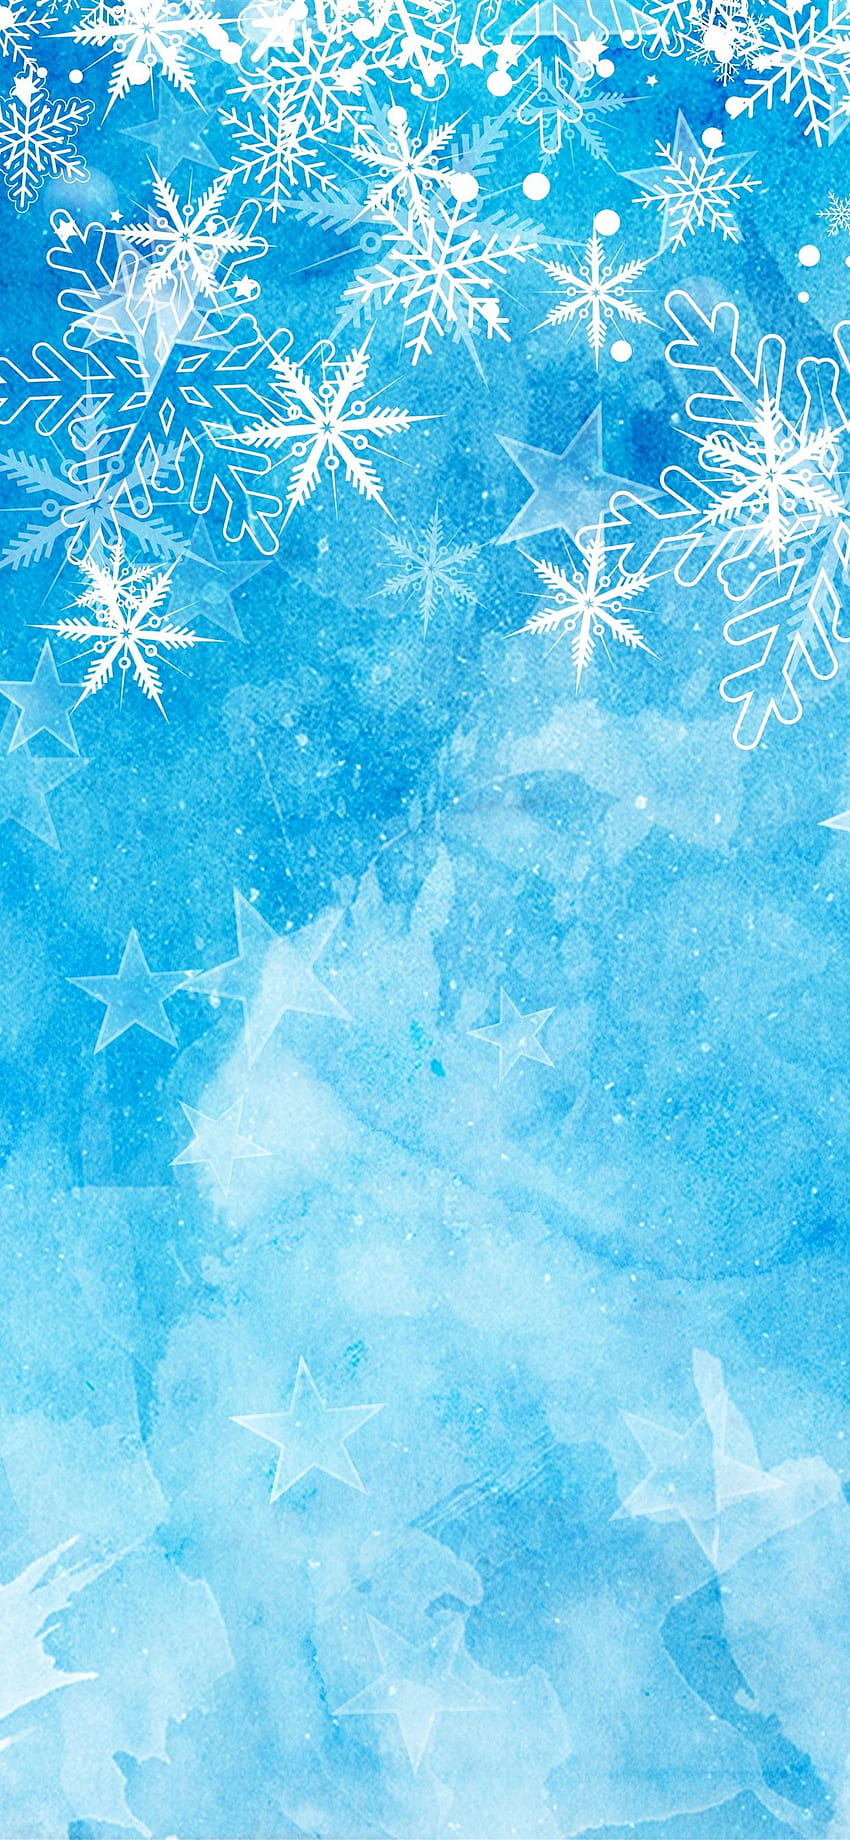 Snowflakes, Blue Background, Christmas Theme IPhone 11 Pro XS Max ...